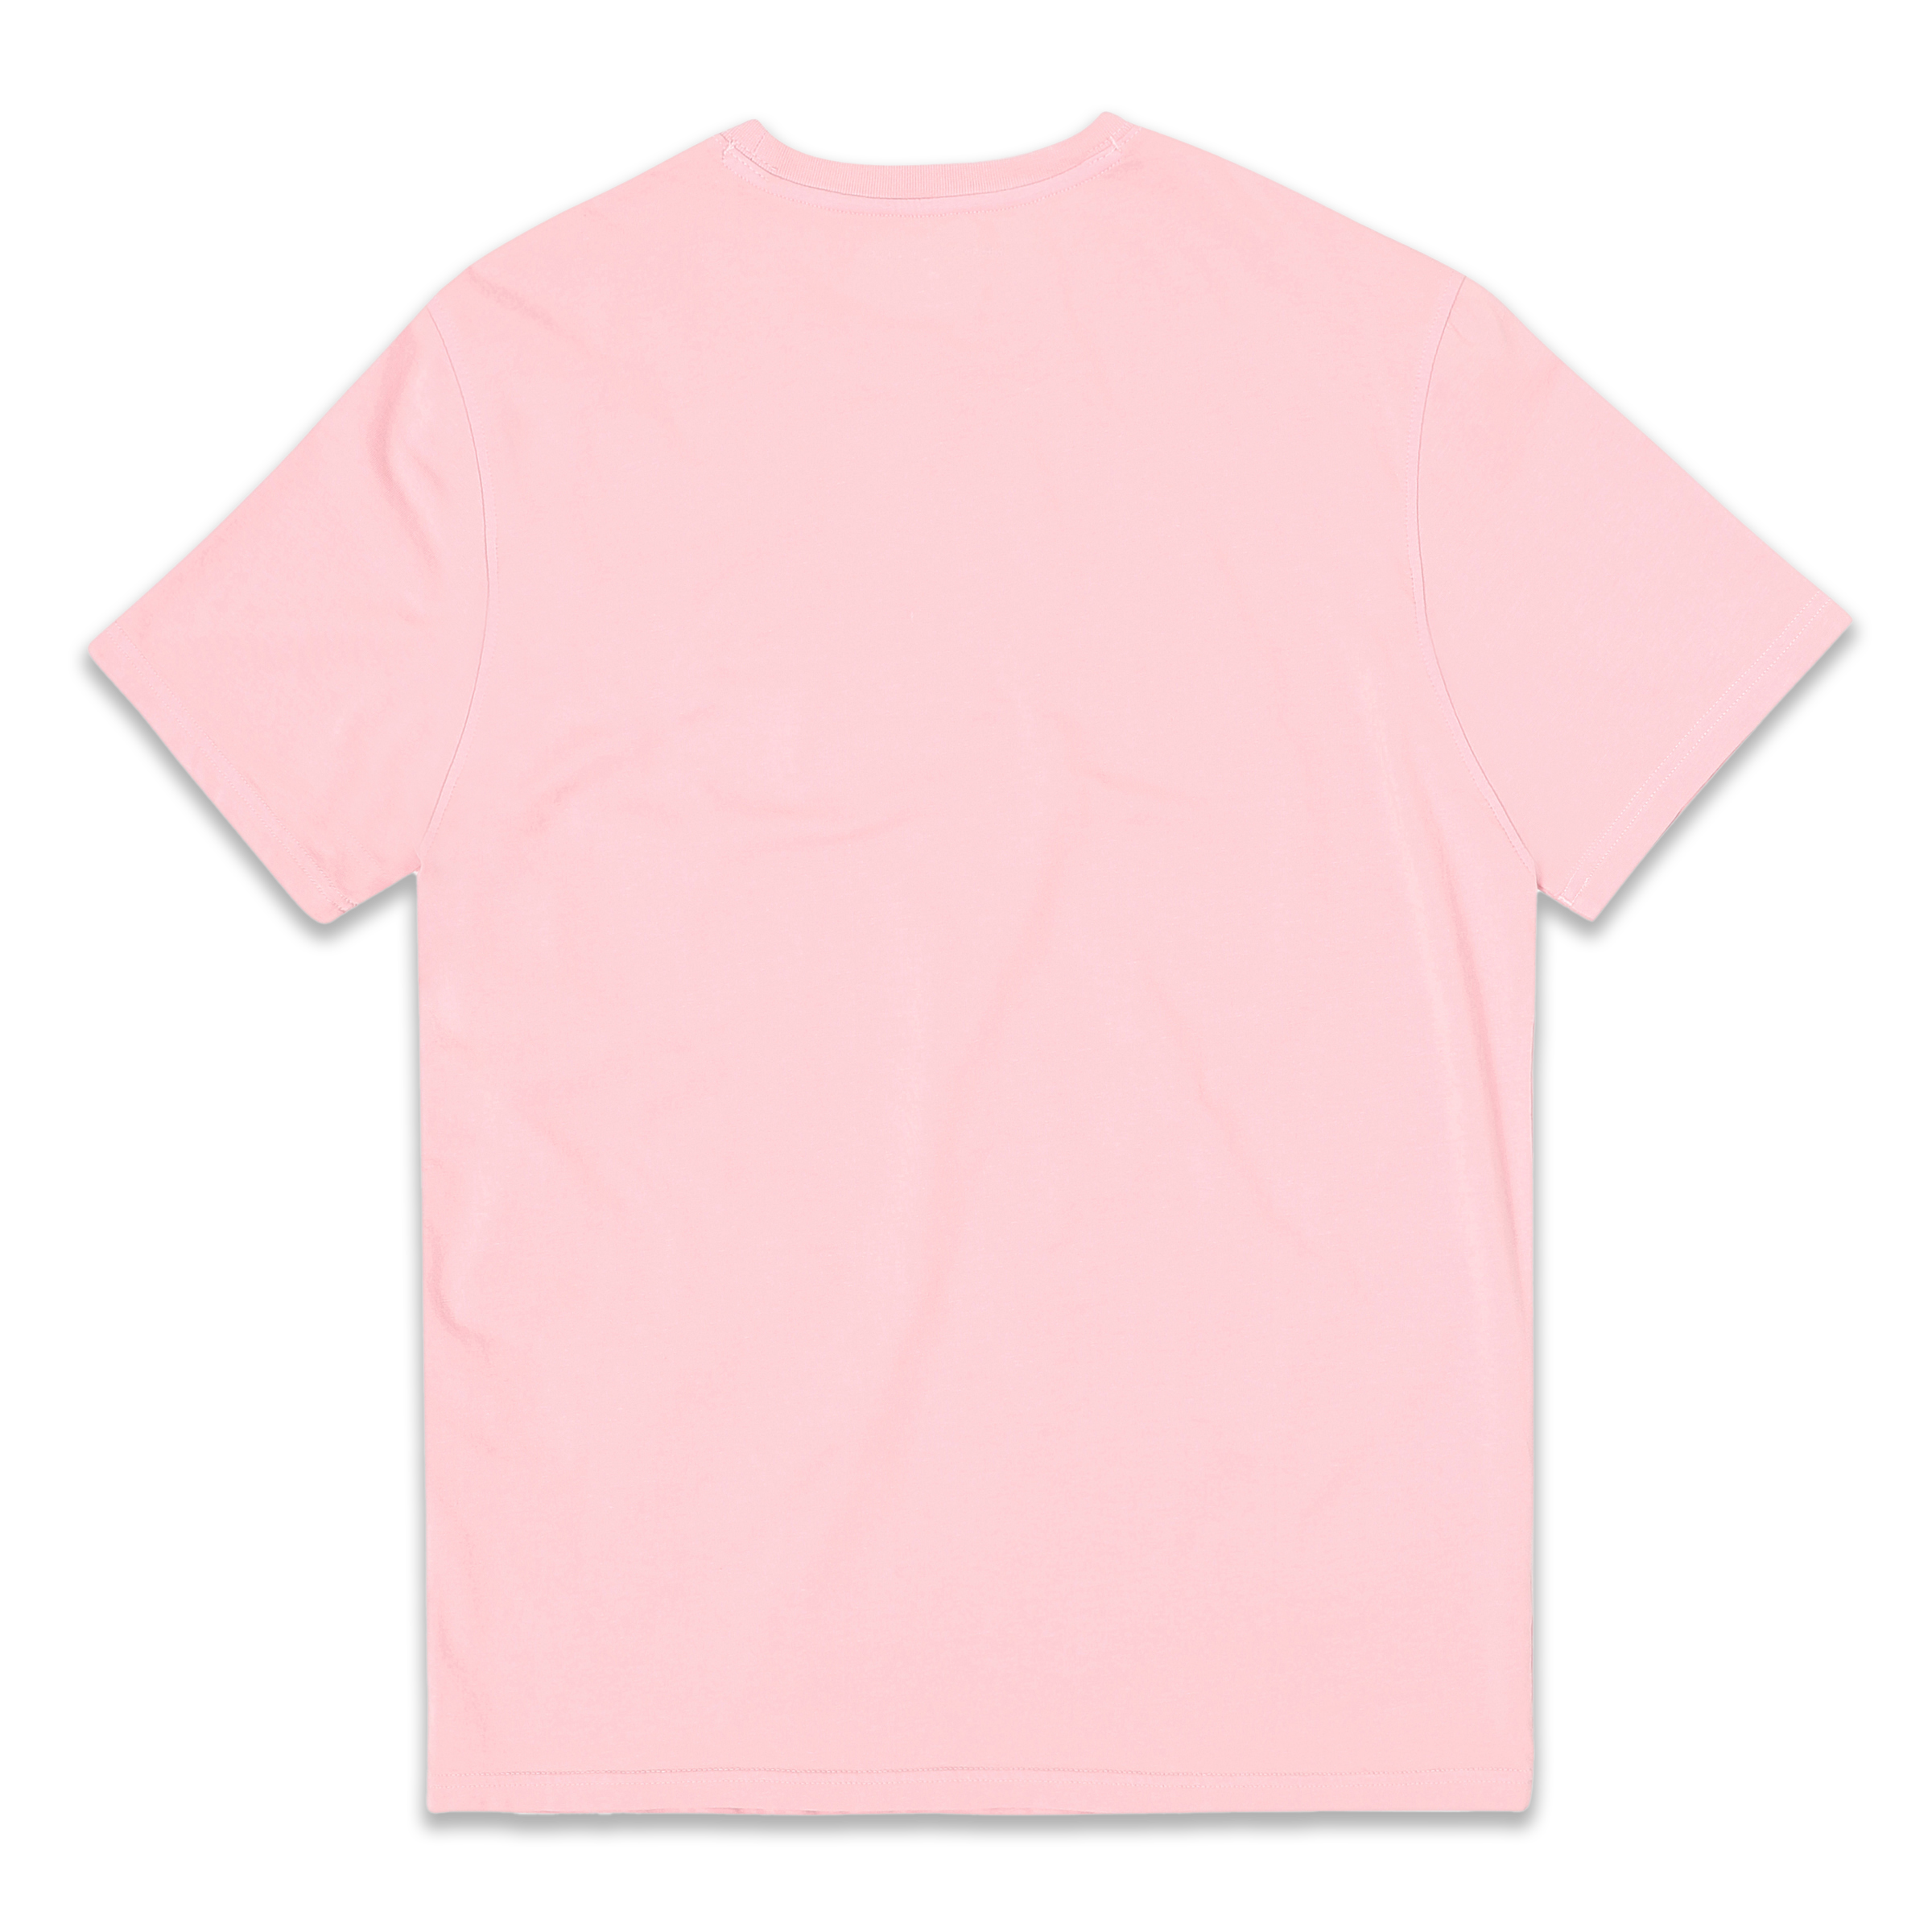 Natural Dye Logo Tee Pink back with crewneck and short sleeves